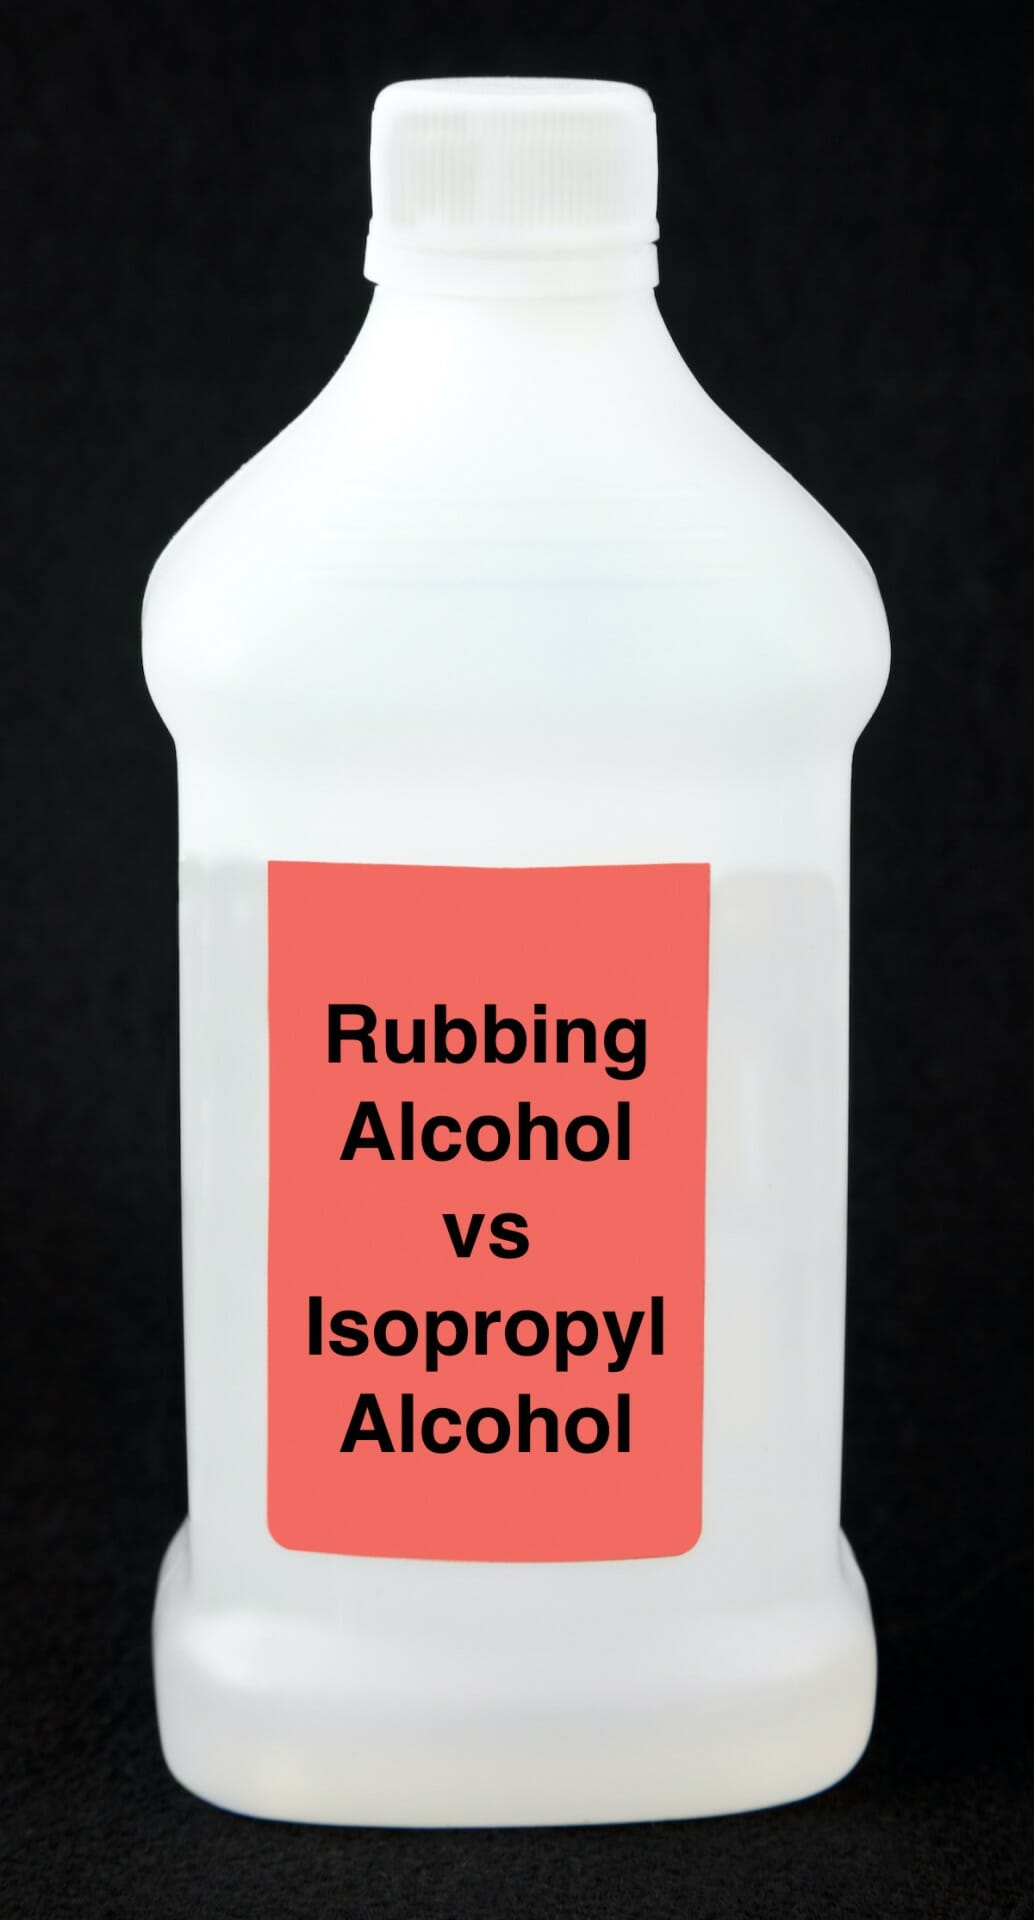 The difference between isopropyl alcohol vs. rubbing alcohol